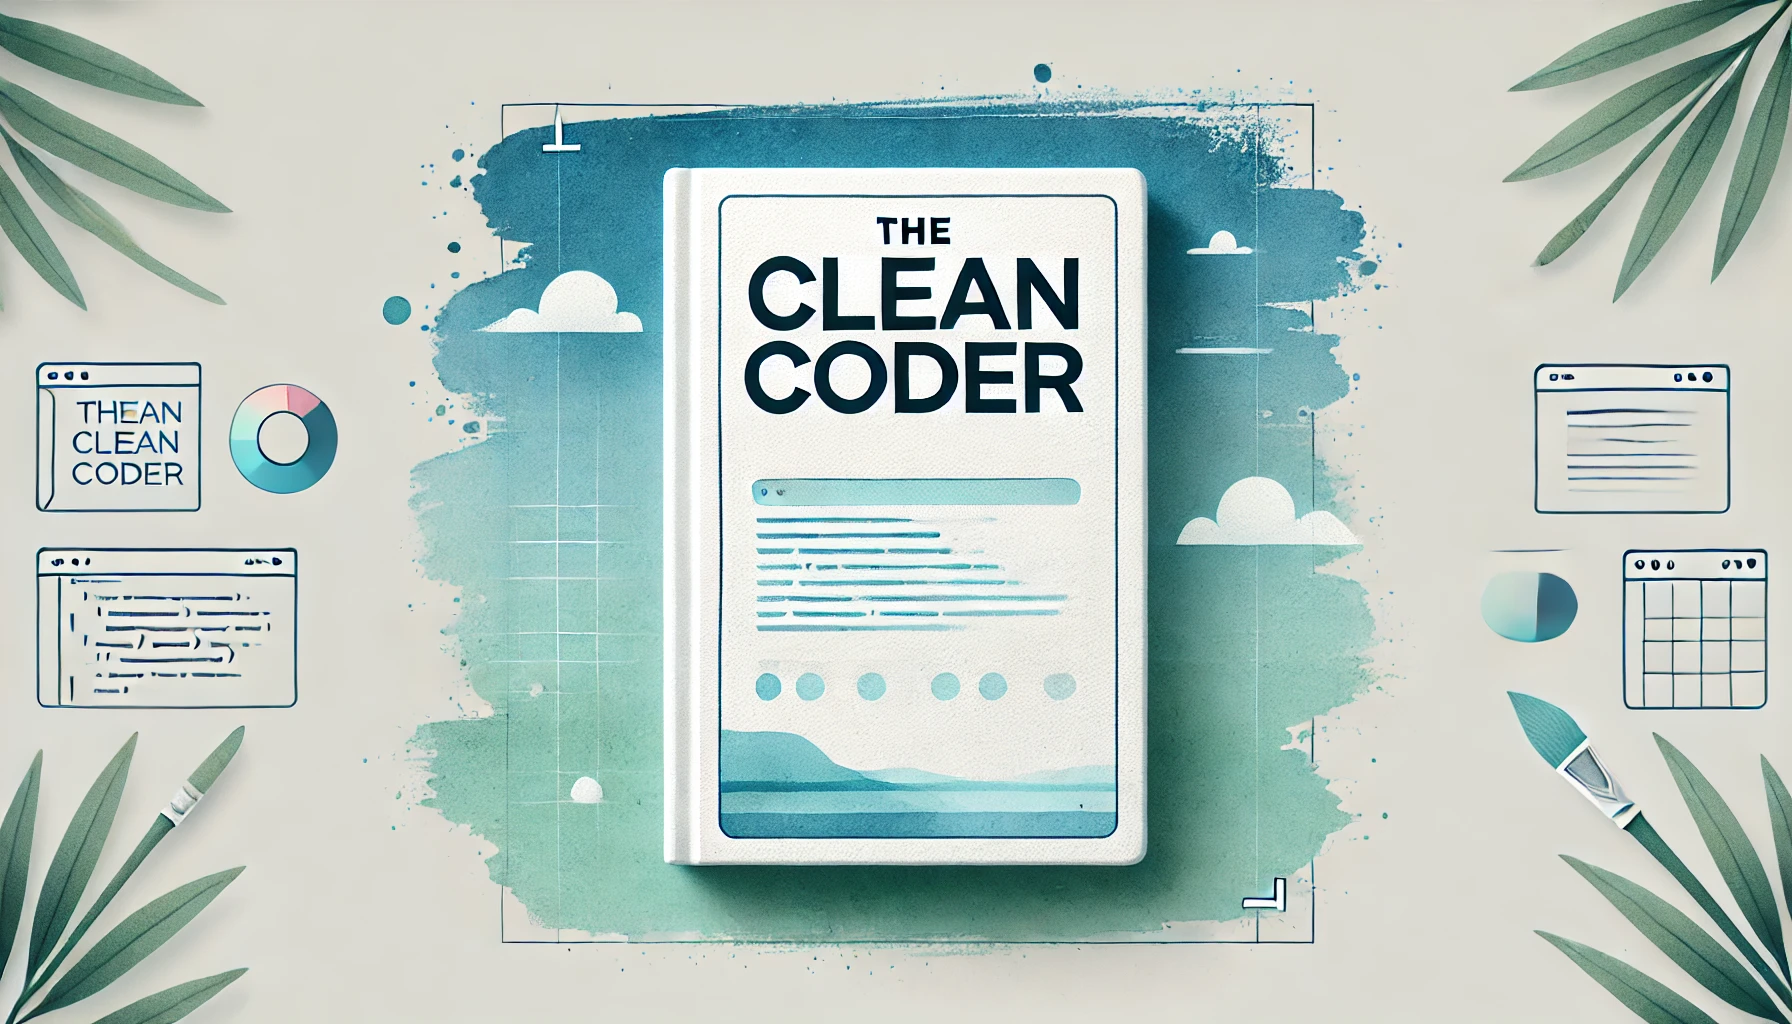 The cover image of thoughts on The Clean Coder book.